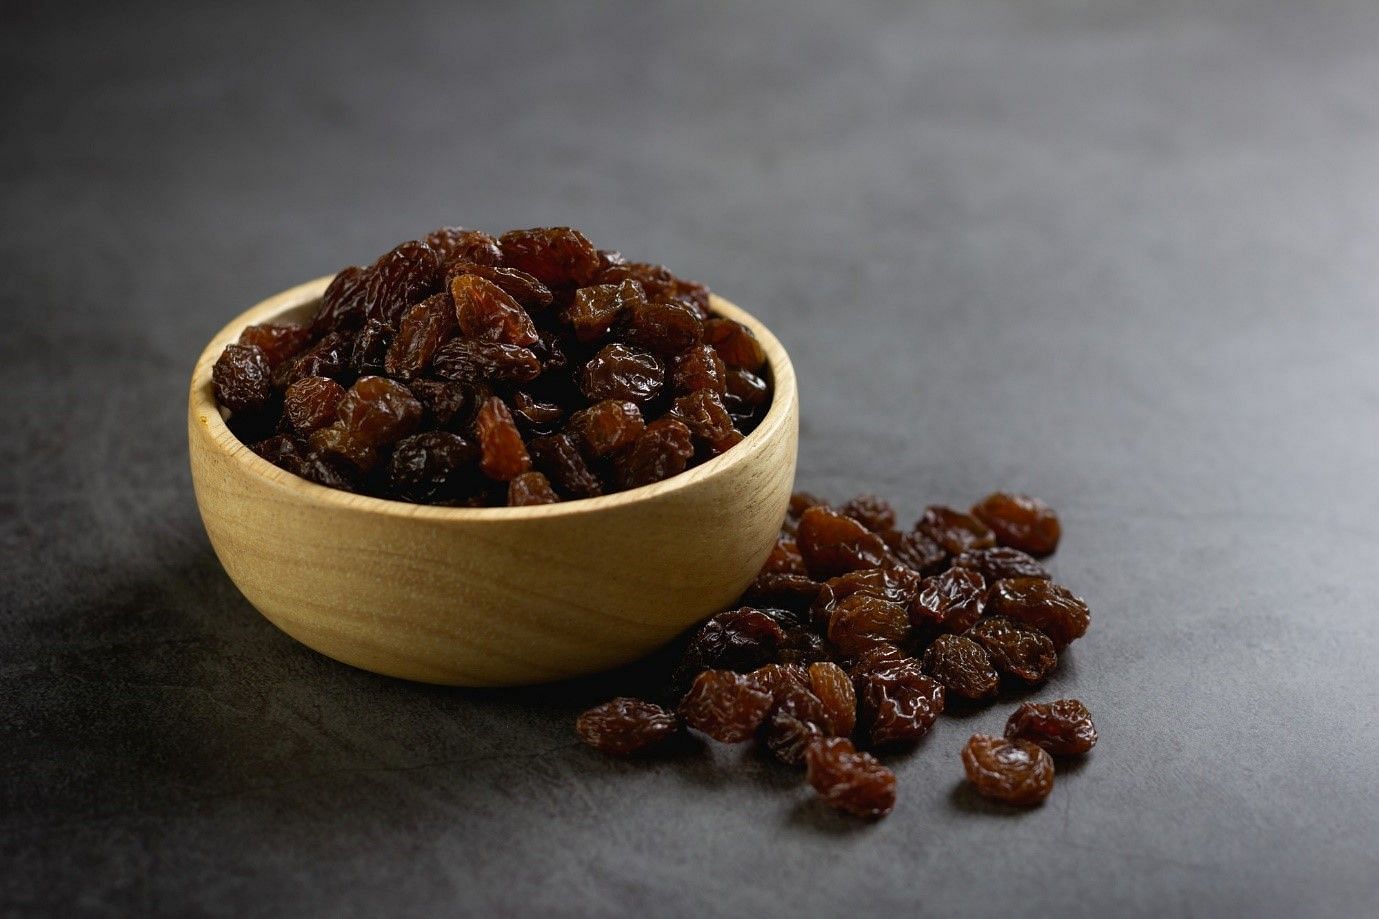 Munakka Raisins are also used in traditional Ayurvedic medicine to promote overall health and well-being (Image by Jcomp on Freepik)